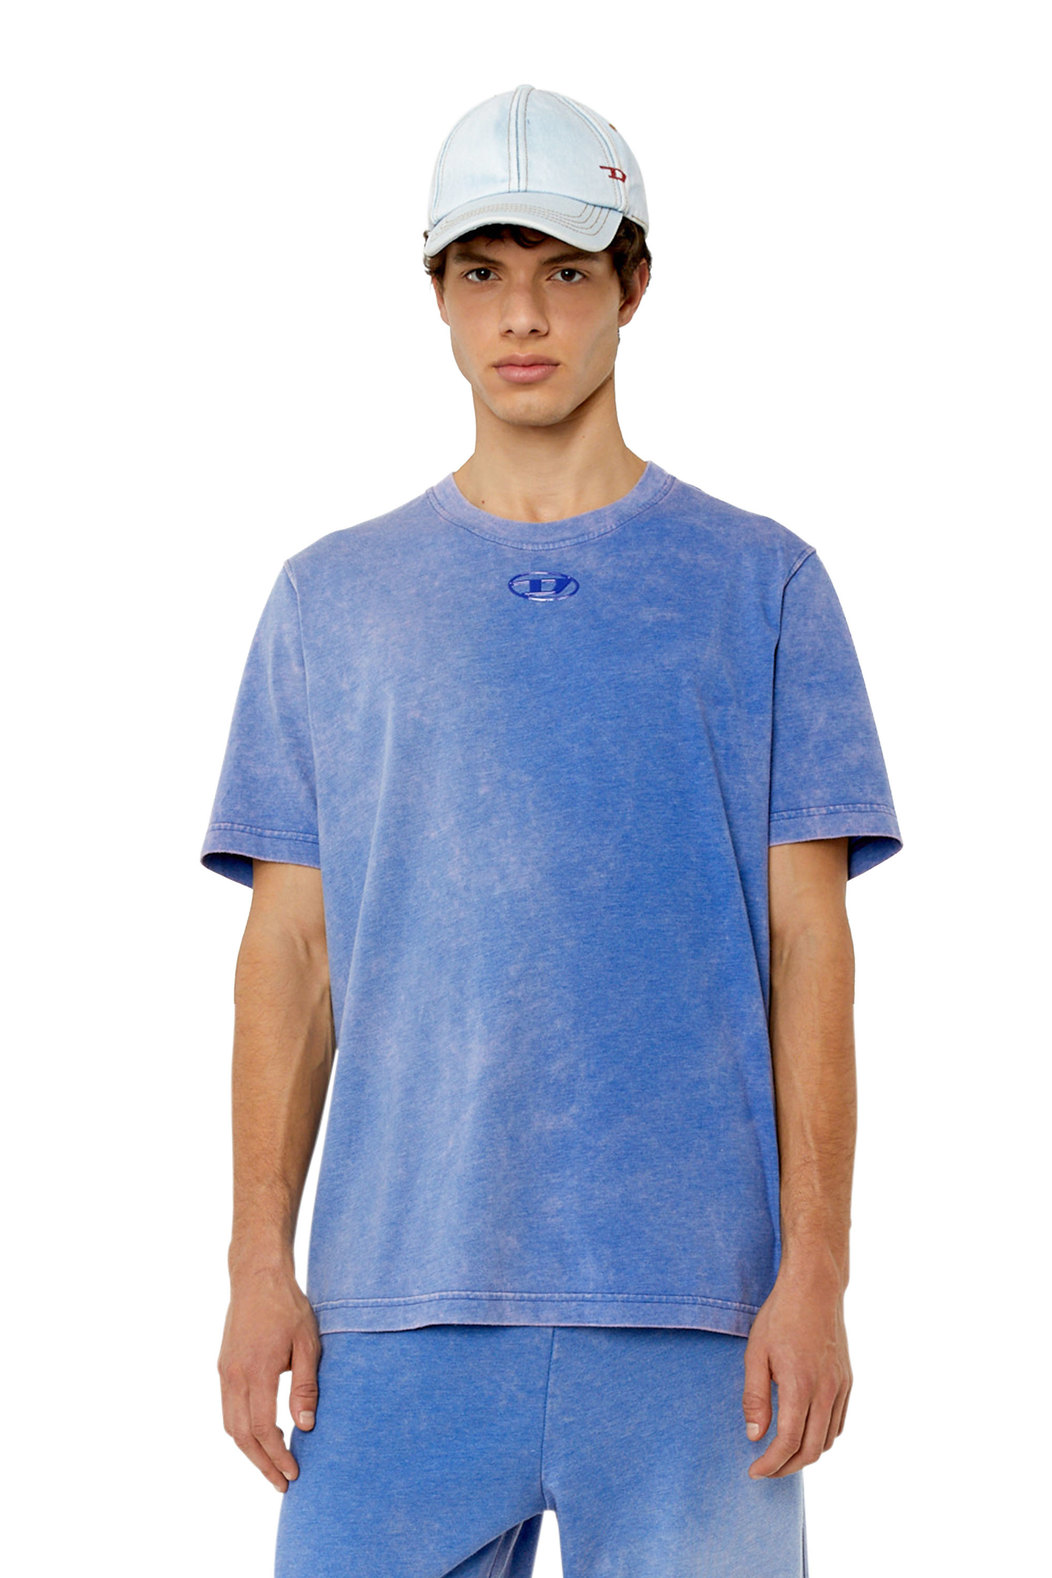 T-shirt with whitened treatment